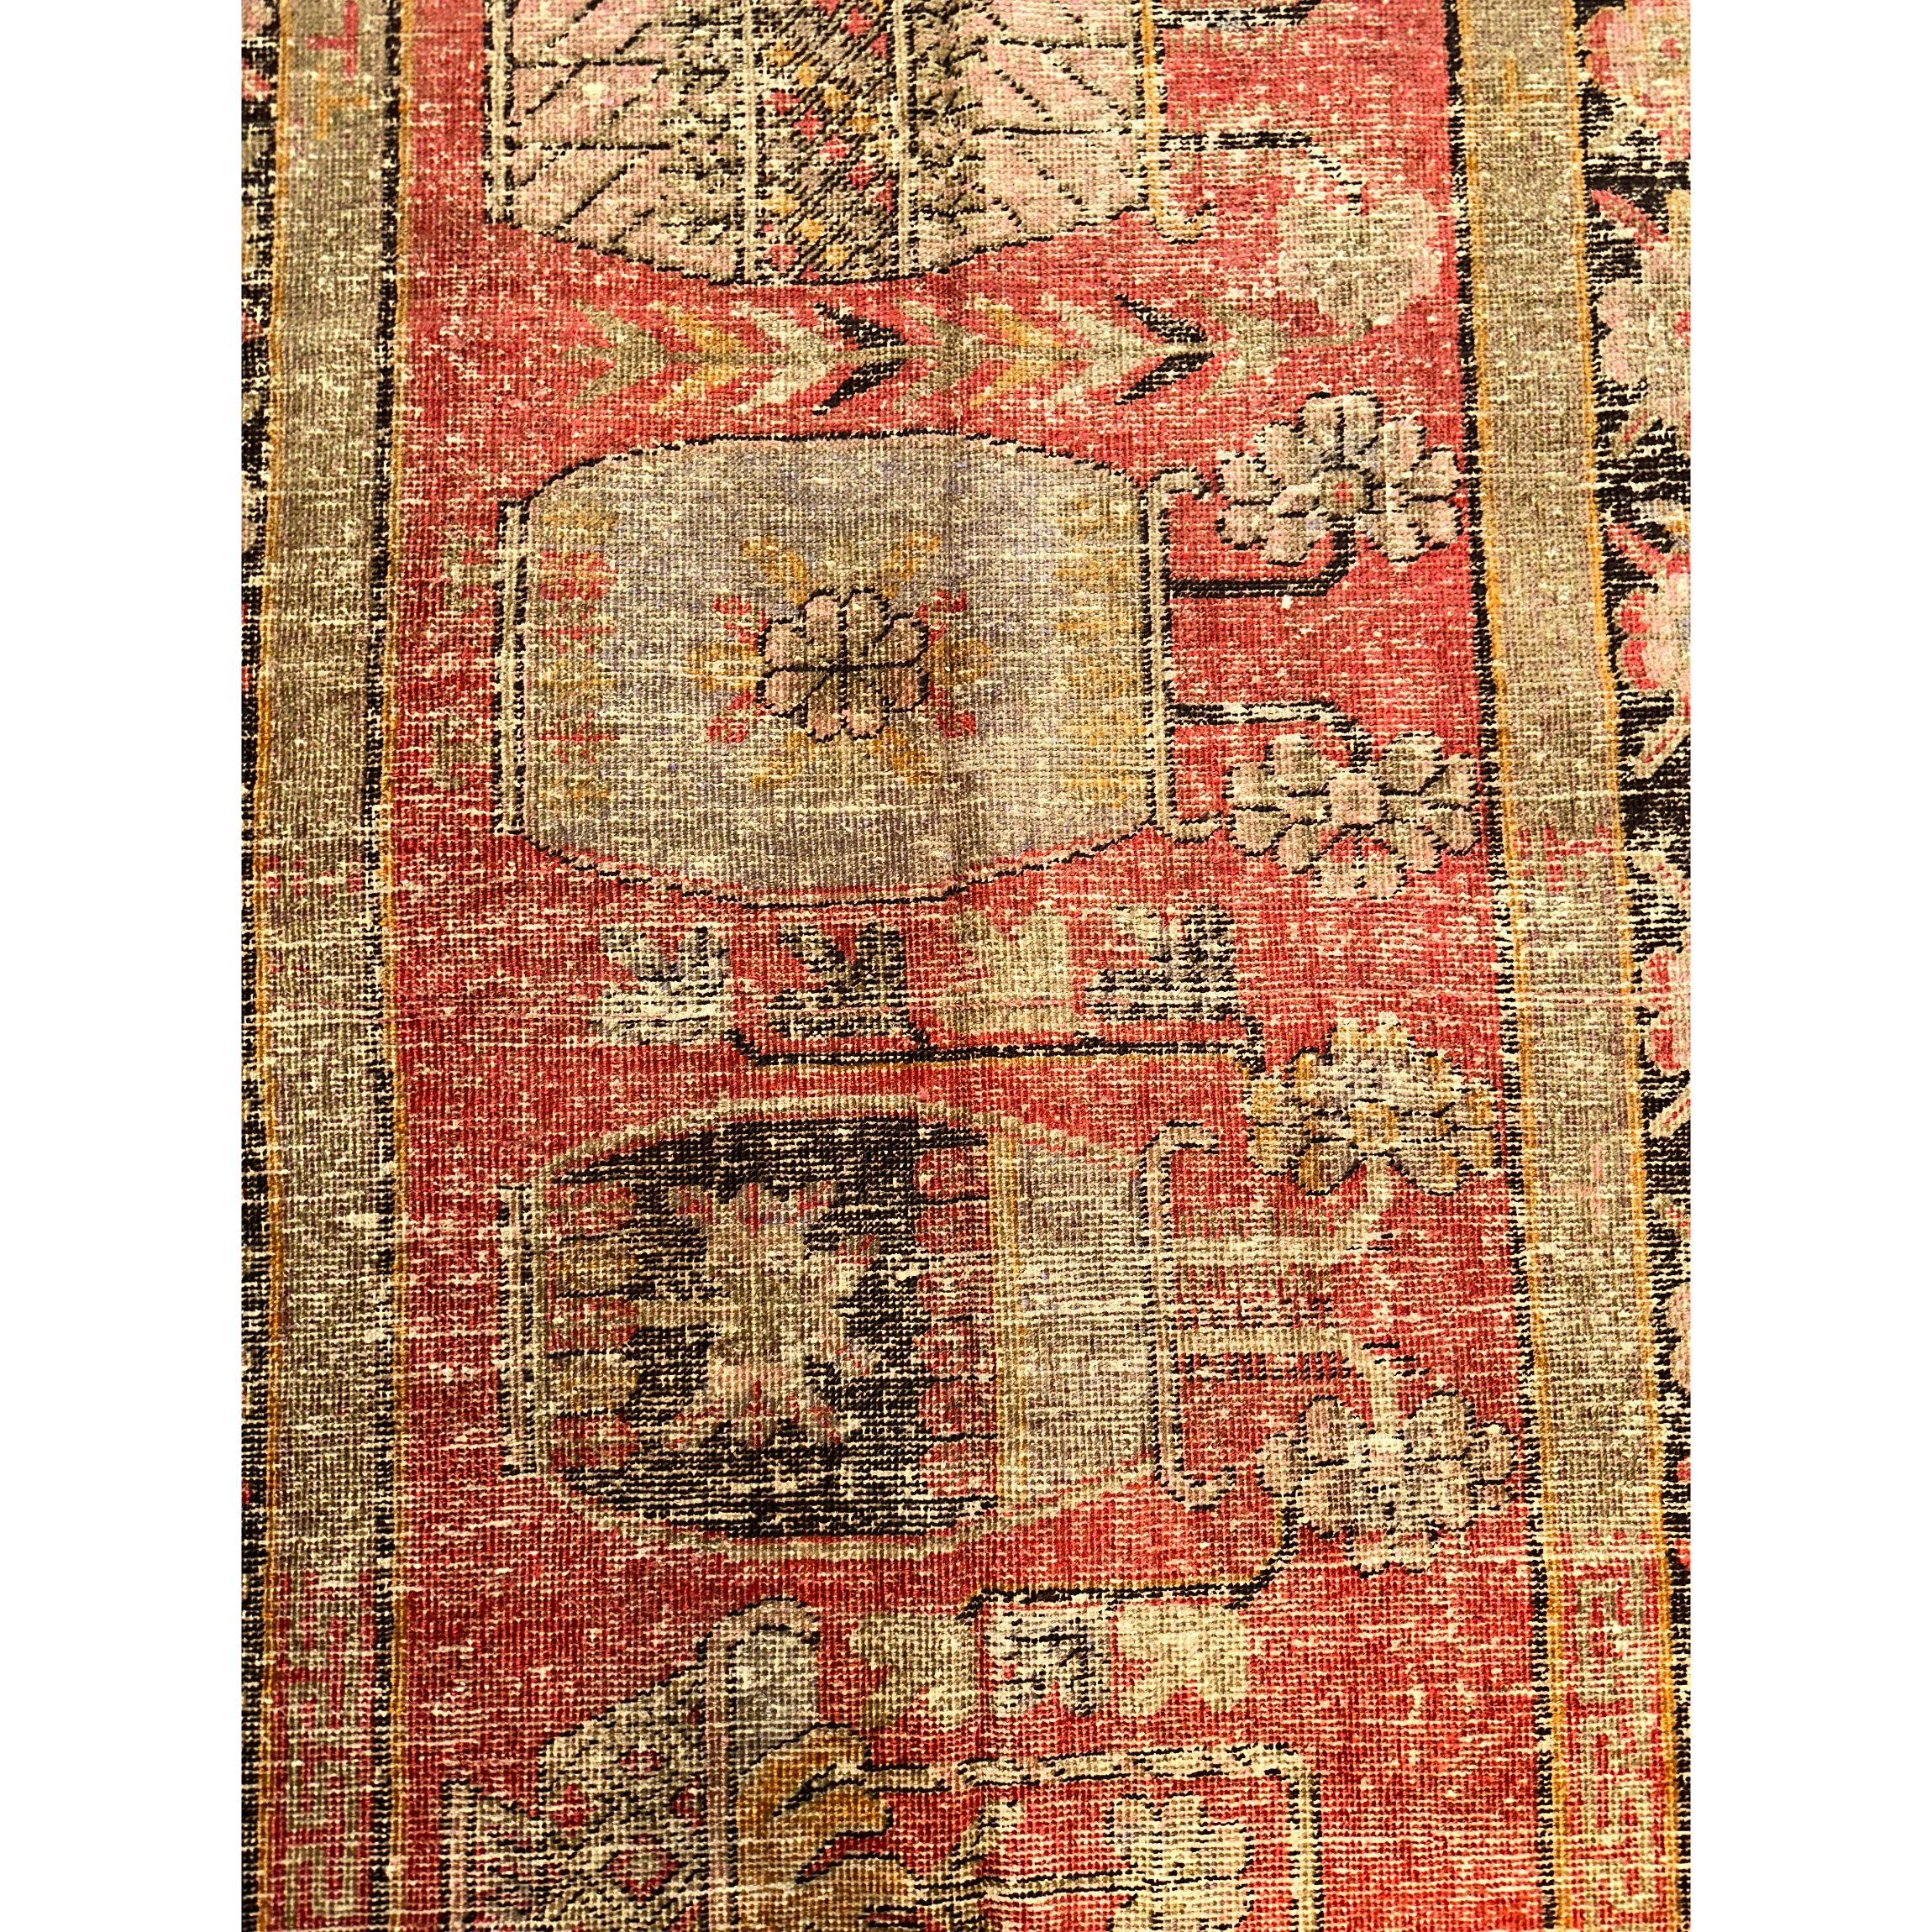 19th Century Authentic Khotan Samarkand Rug In Good Condition For Sale In Los Angeles, US